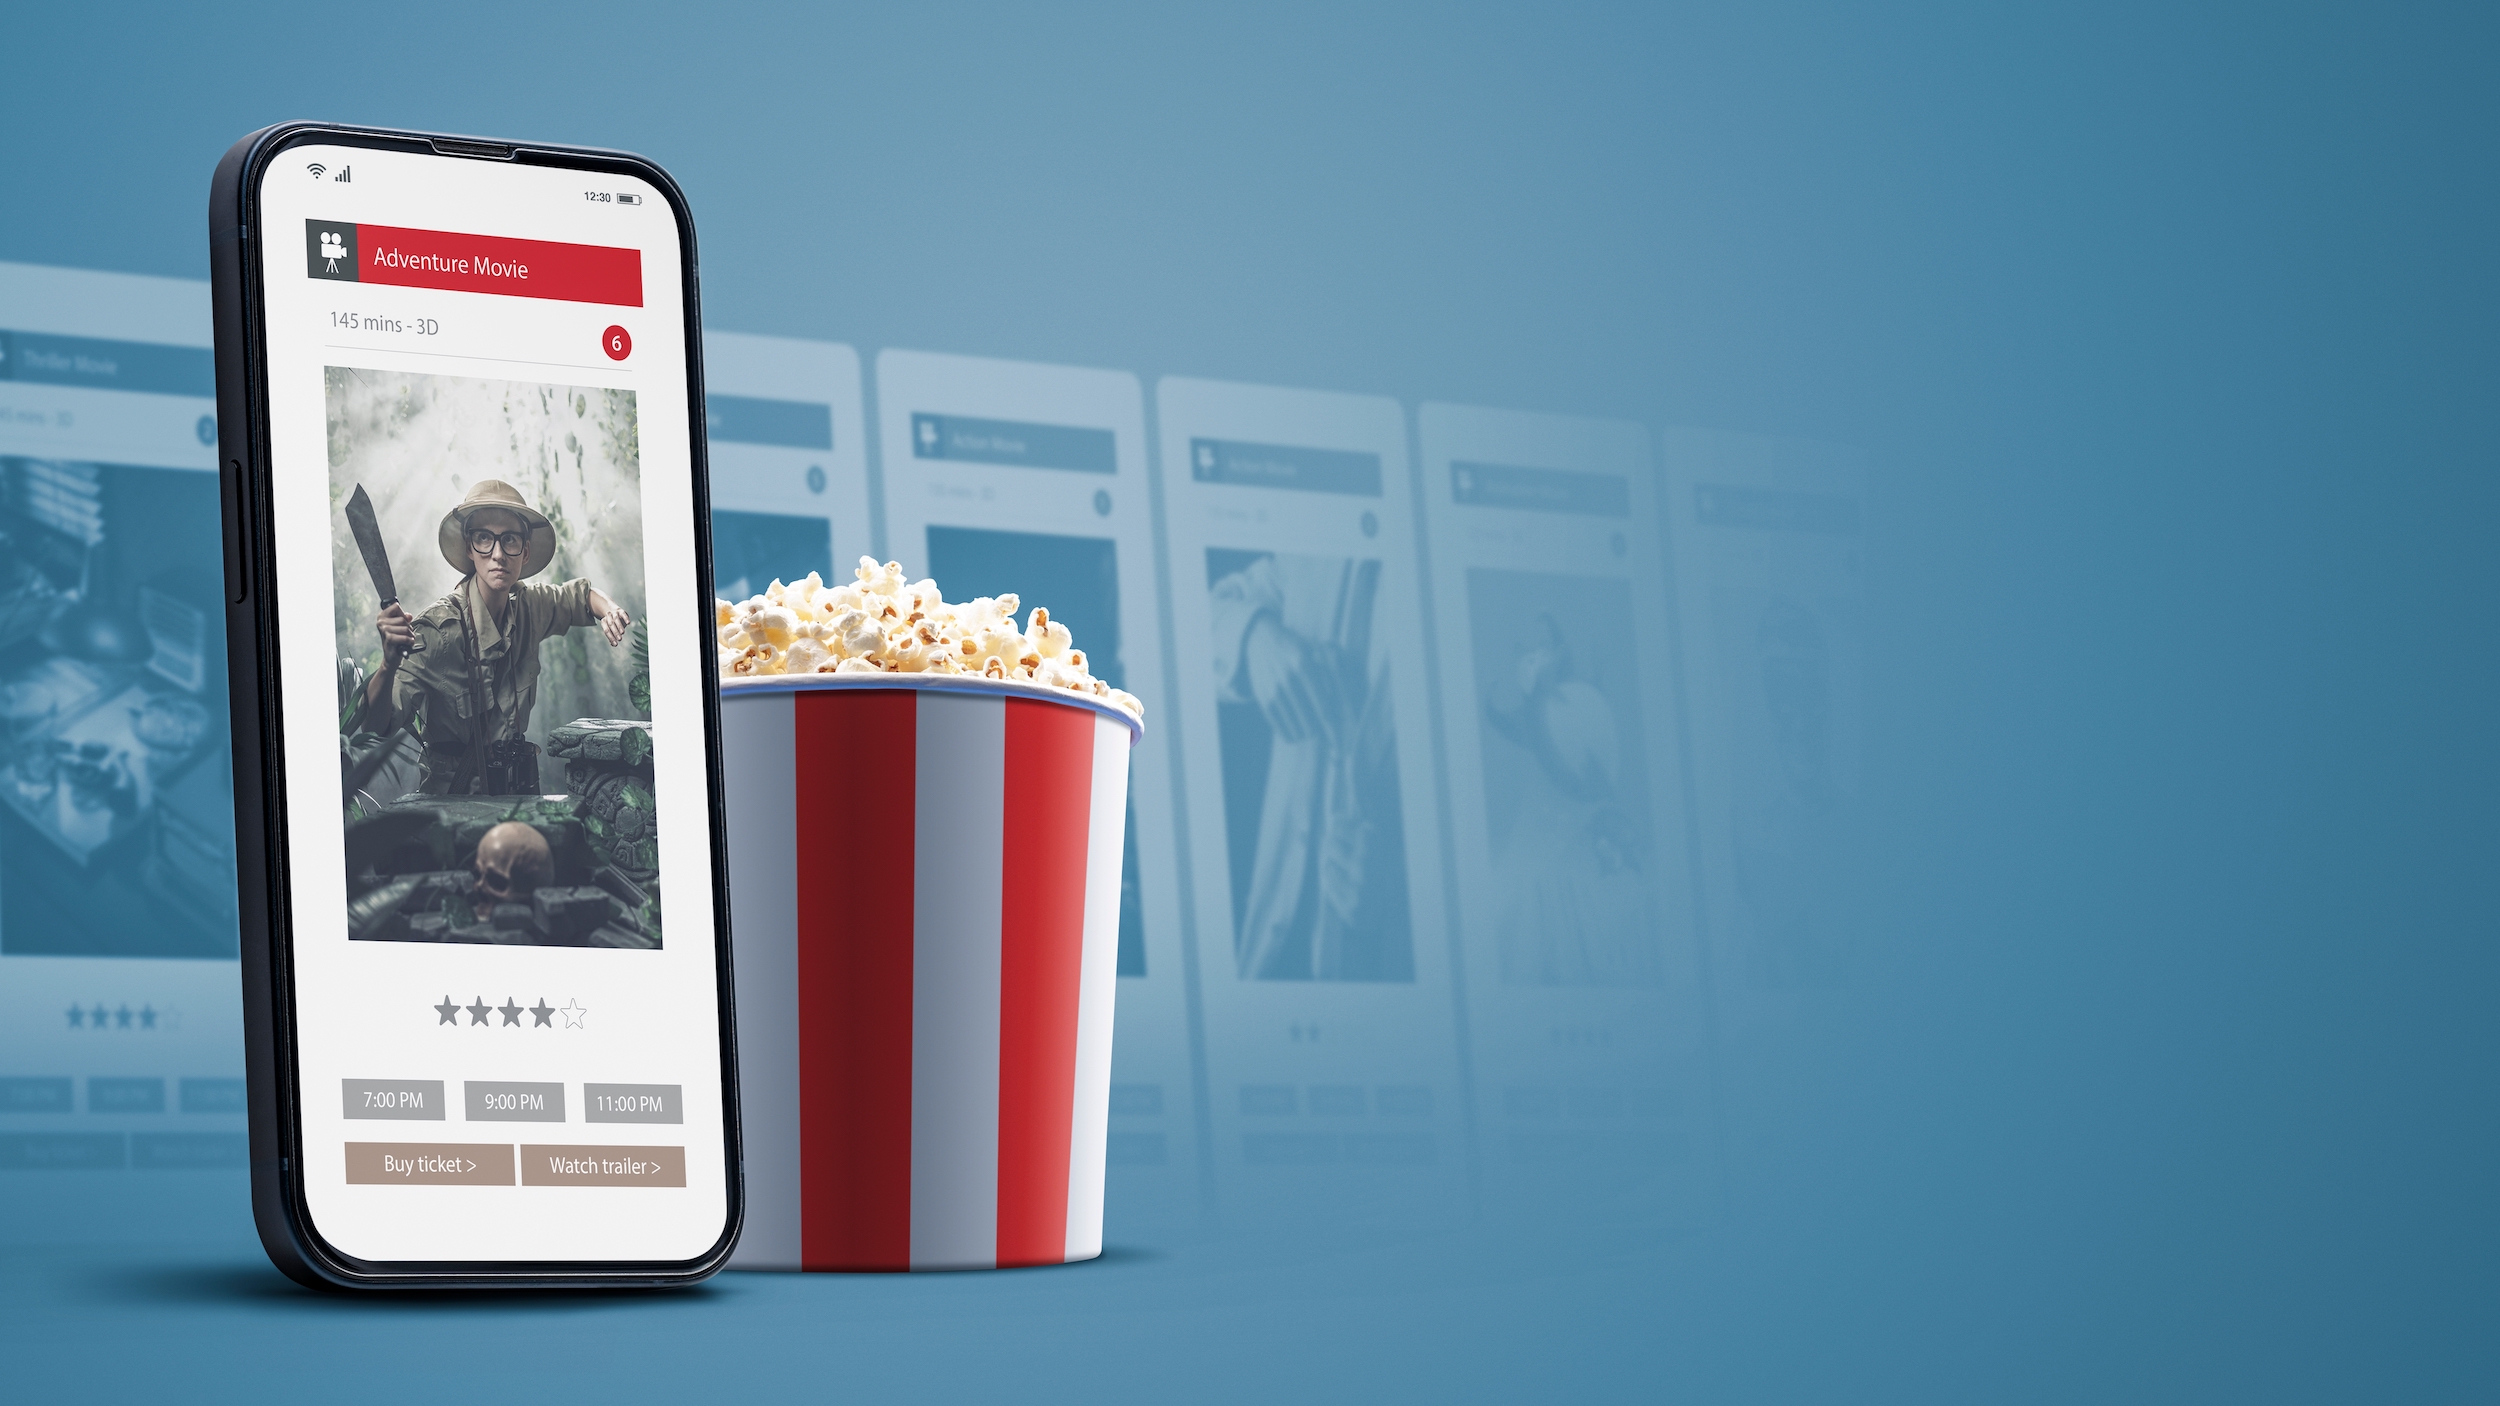 Popcorn and mobile activation for cinema